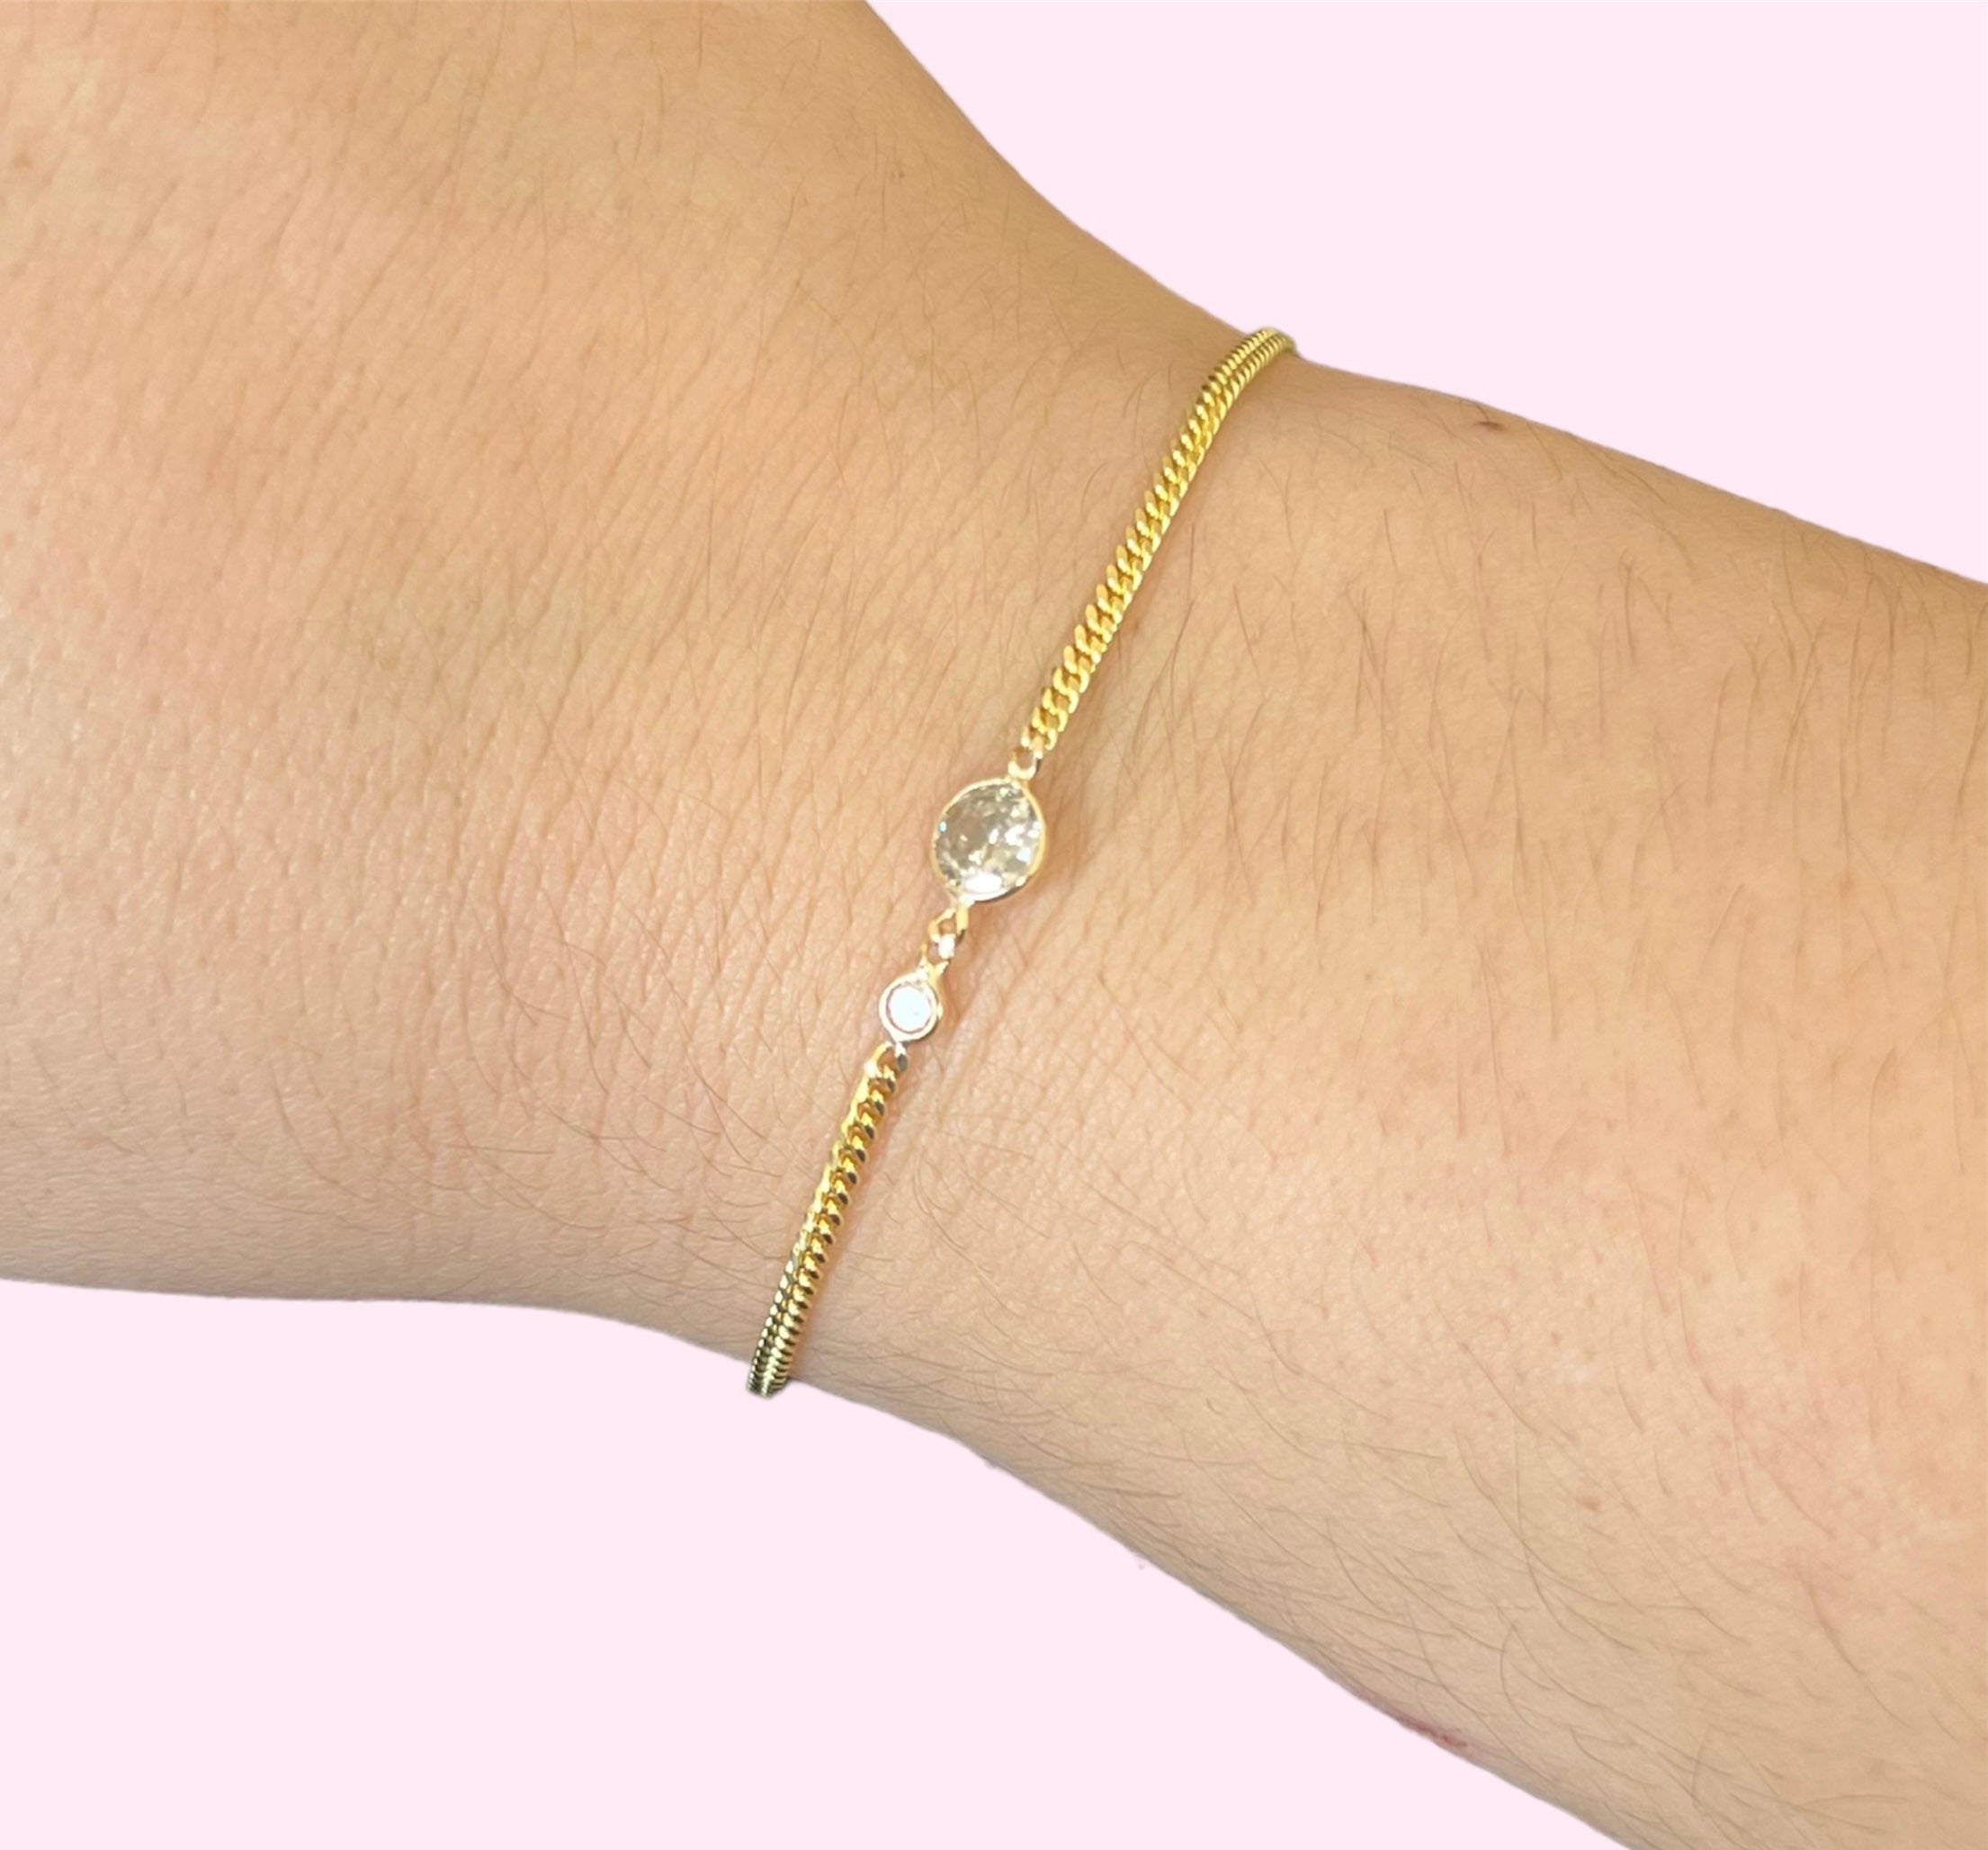 14K in Solid Yellow Gold Diamond Solitaire Bracelet 6.75"